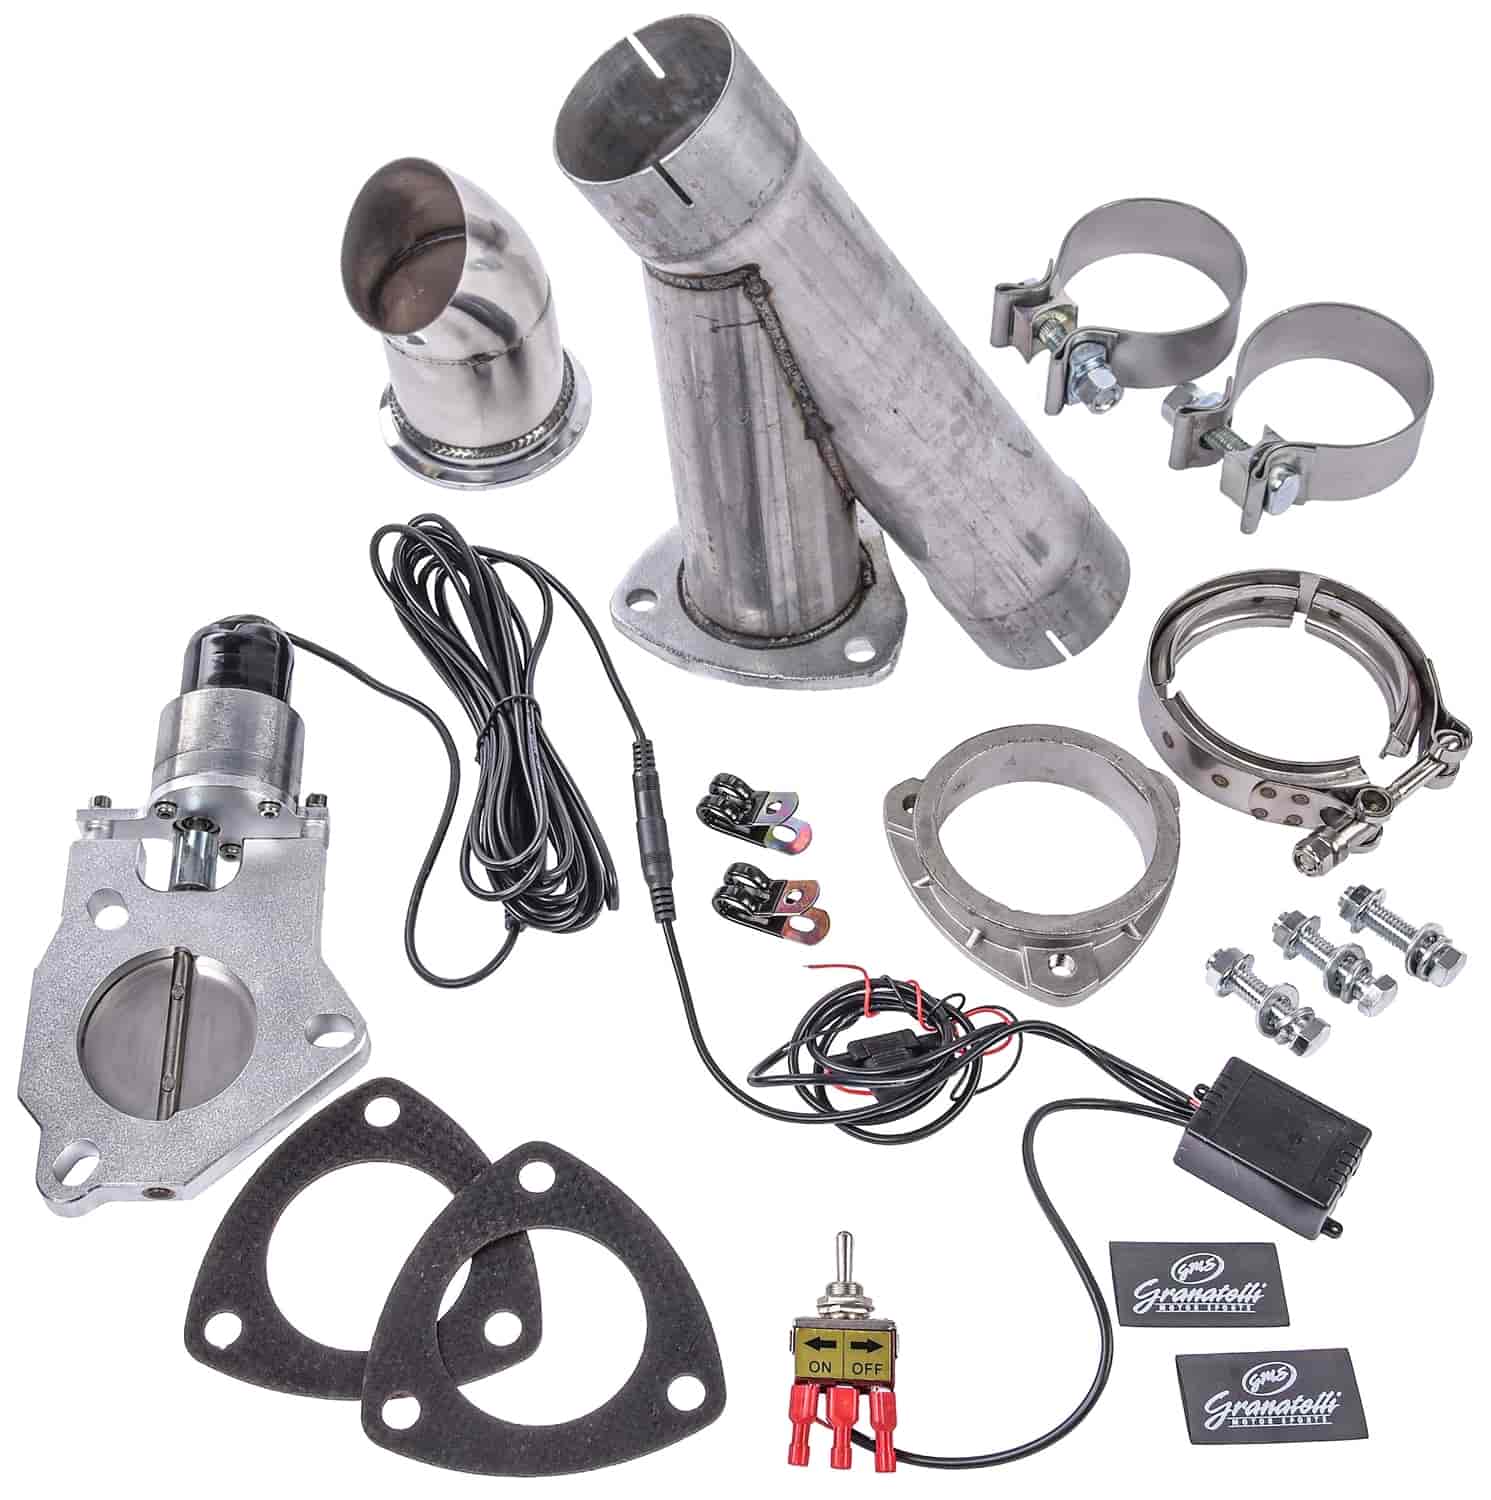 Electronic Aluminized Mild Steel Exhaust Cutout System for 4 in. Single Exhaust (Slip-Fit)